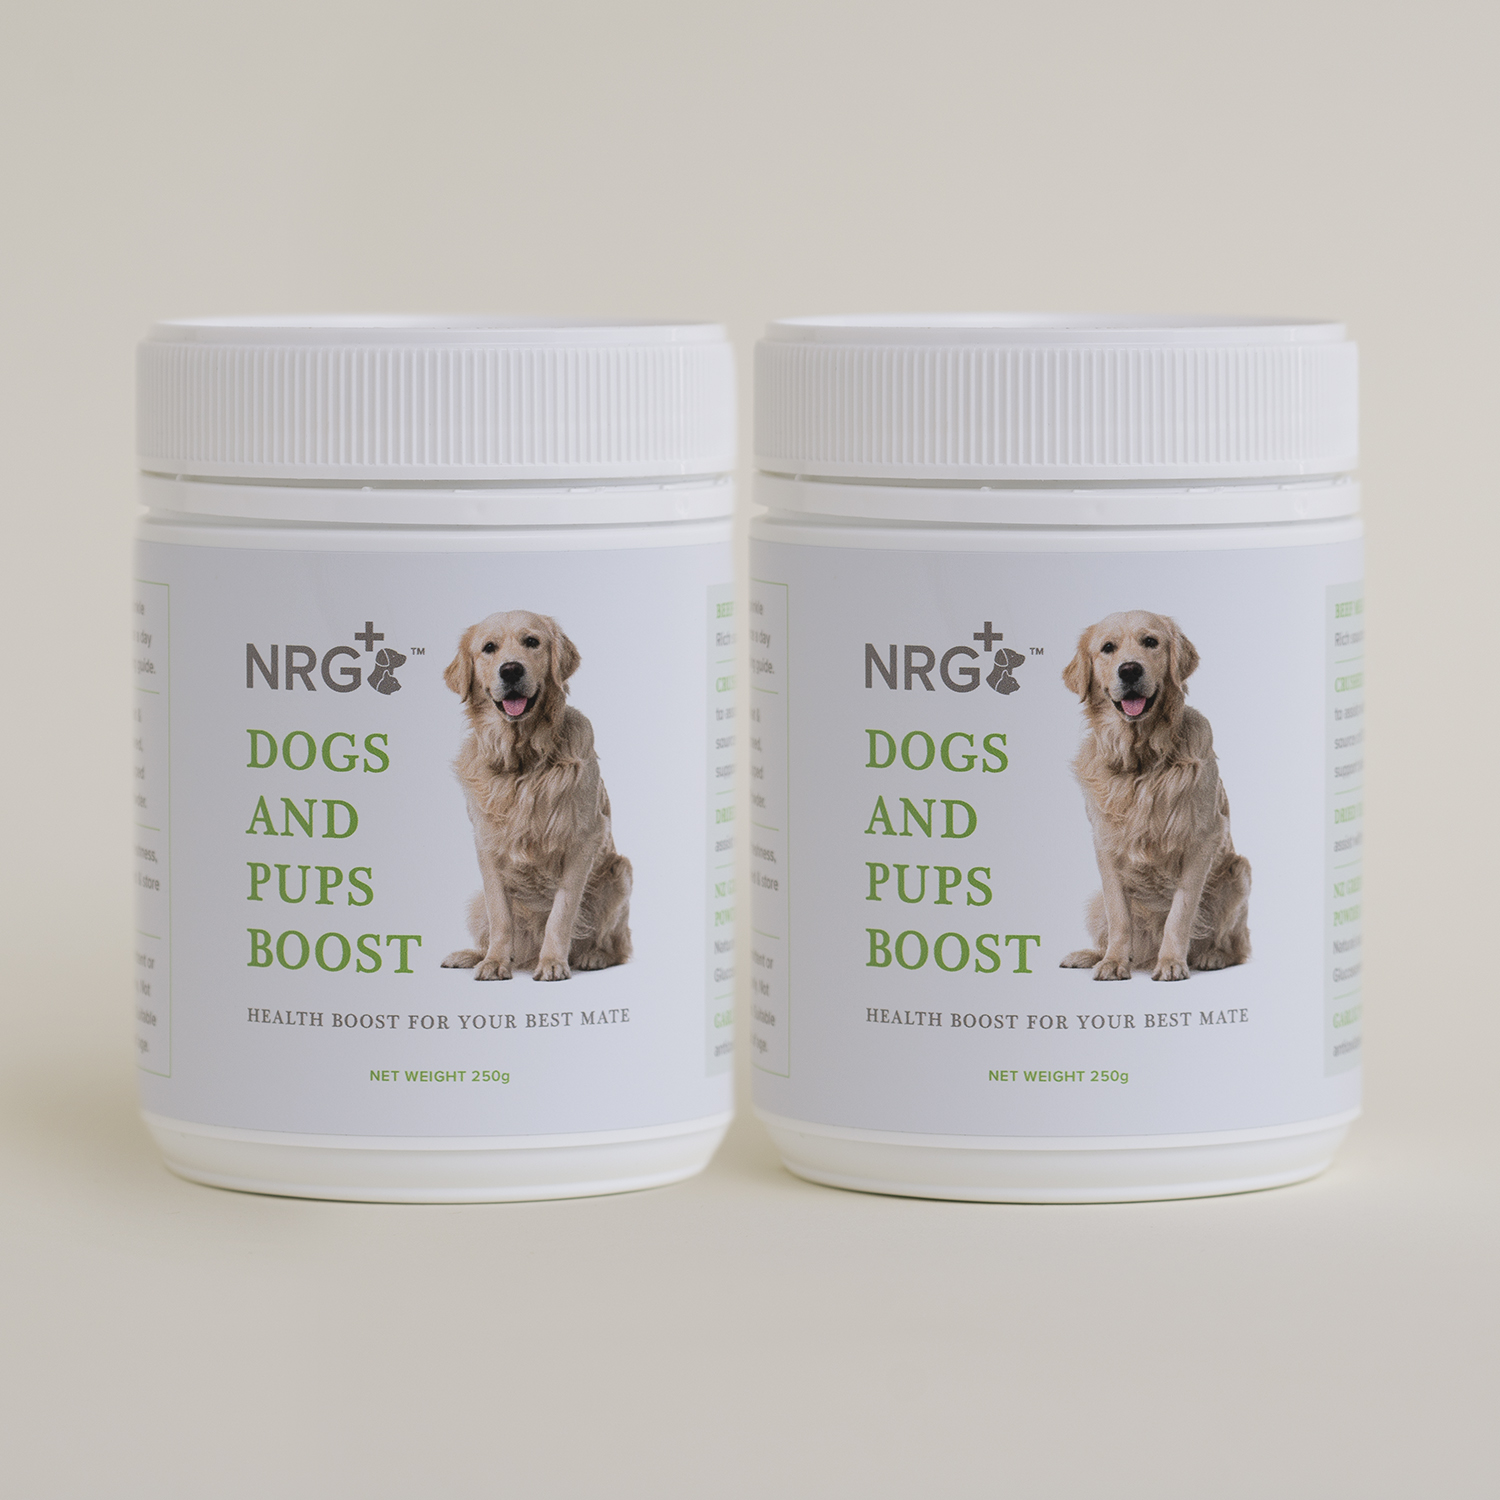 Dogs & Pups Boost Supplement | Dog Supplements | NRG Plus